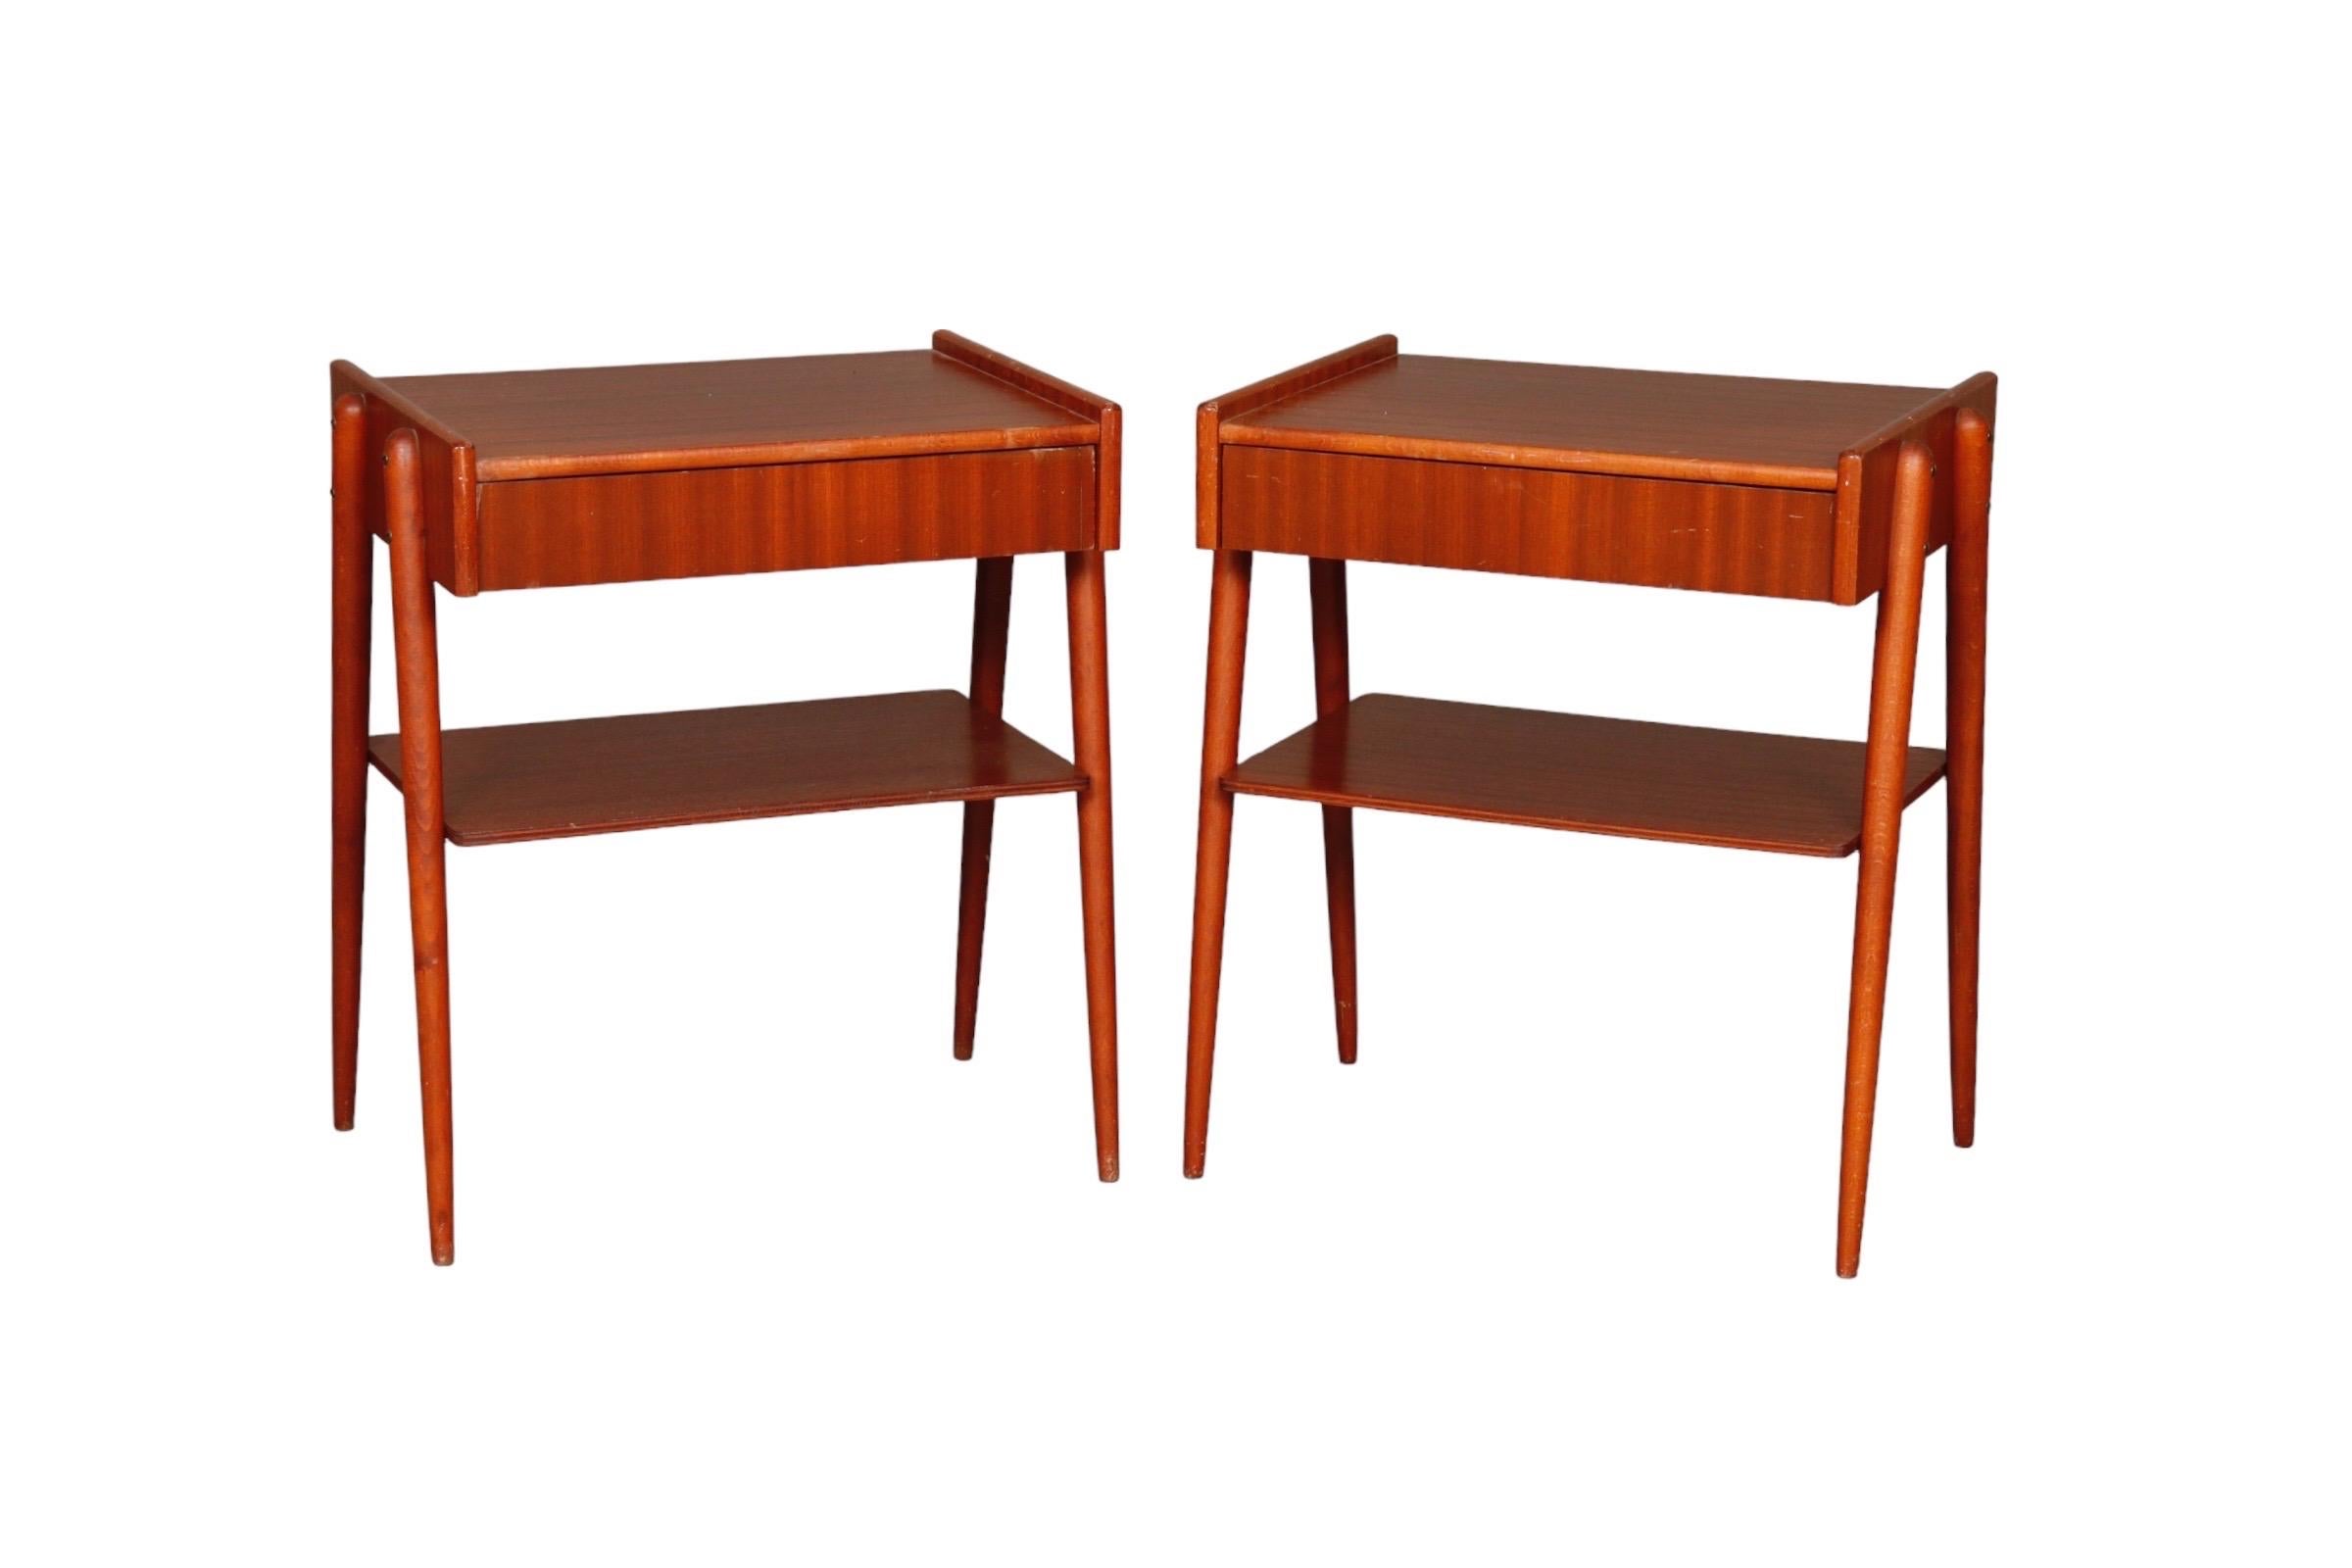 Pair of Mid-Century Modern nightstands by Carlström & Co Möbelfabrik. Made of teak with a single dovetailed drawer above a shelf.

Measures: W17” x D13” x H21”.